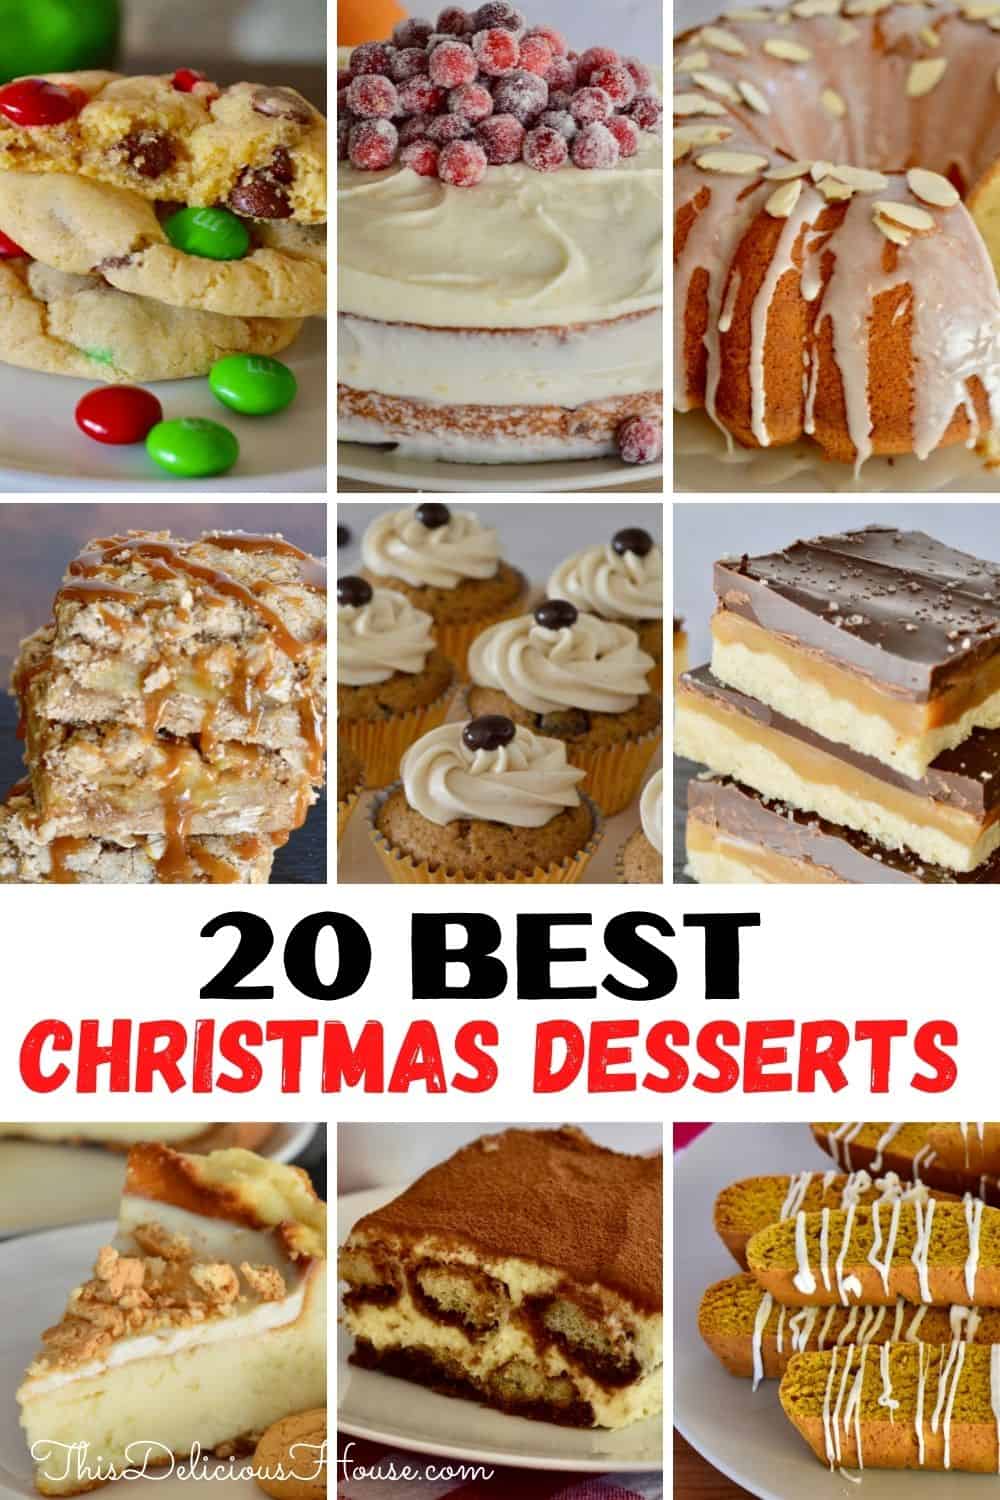 Best Christmas Desserts are 20 recipes that you'll want to make all year round! The easy and fun recipes are tested and perfected. Check out the best desserts to add to your holiday table. 